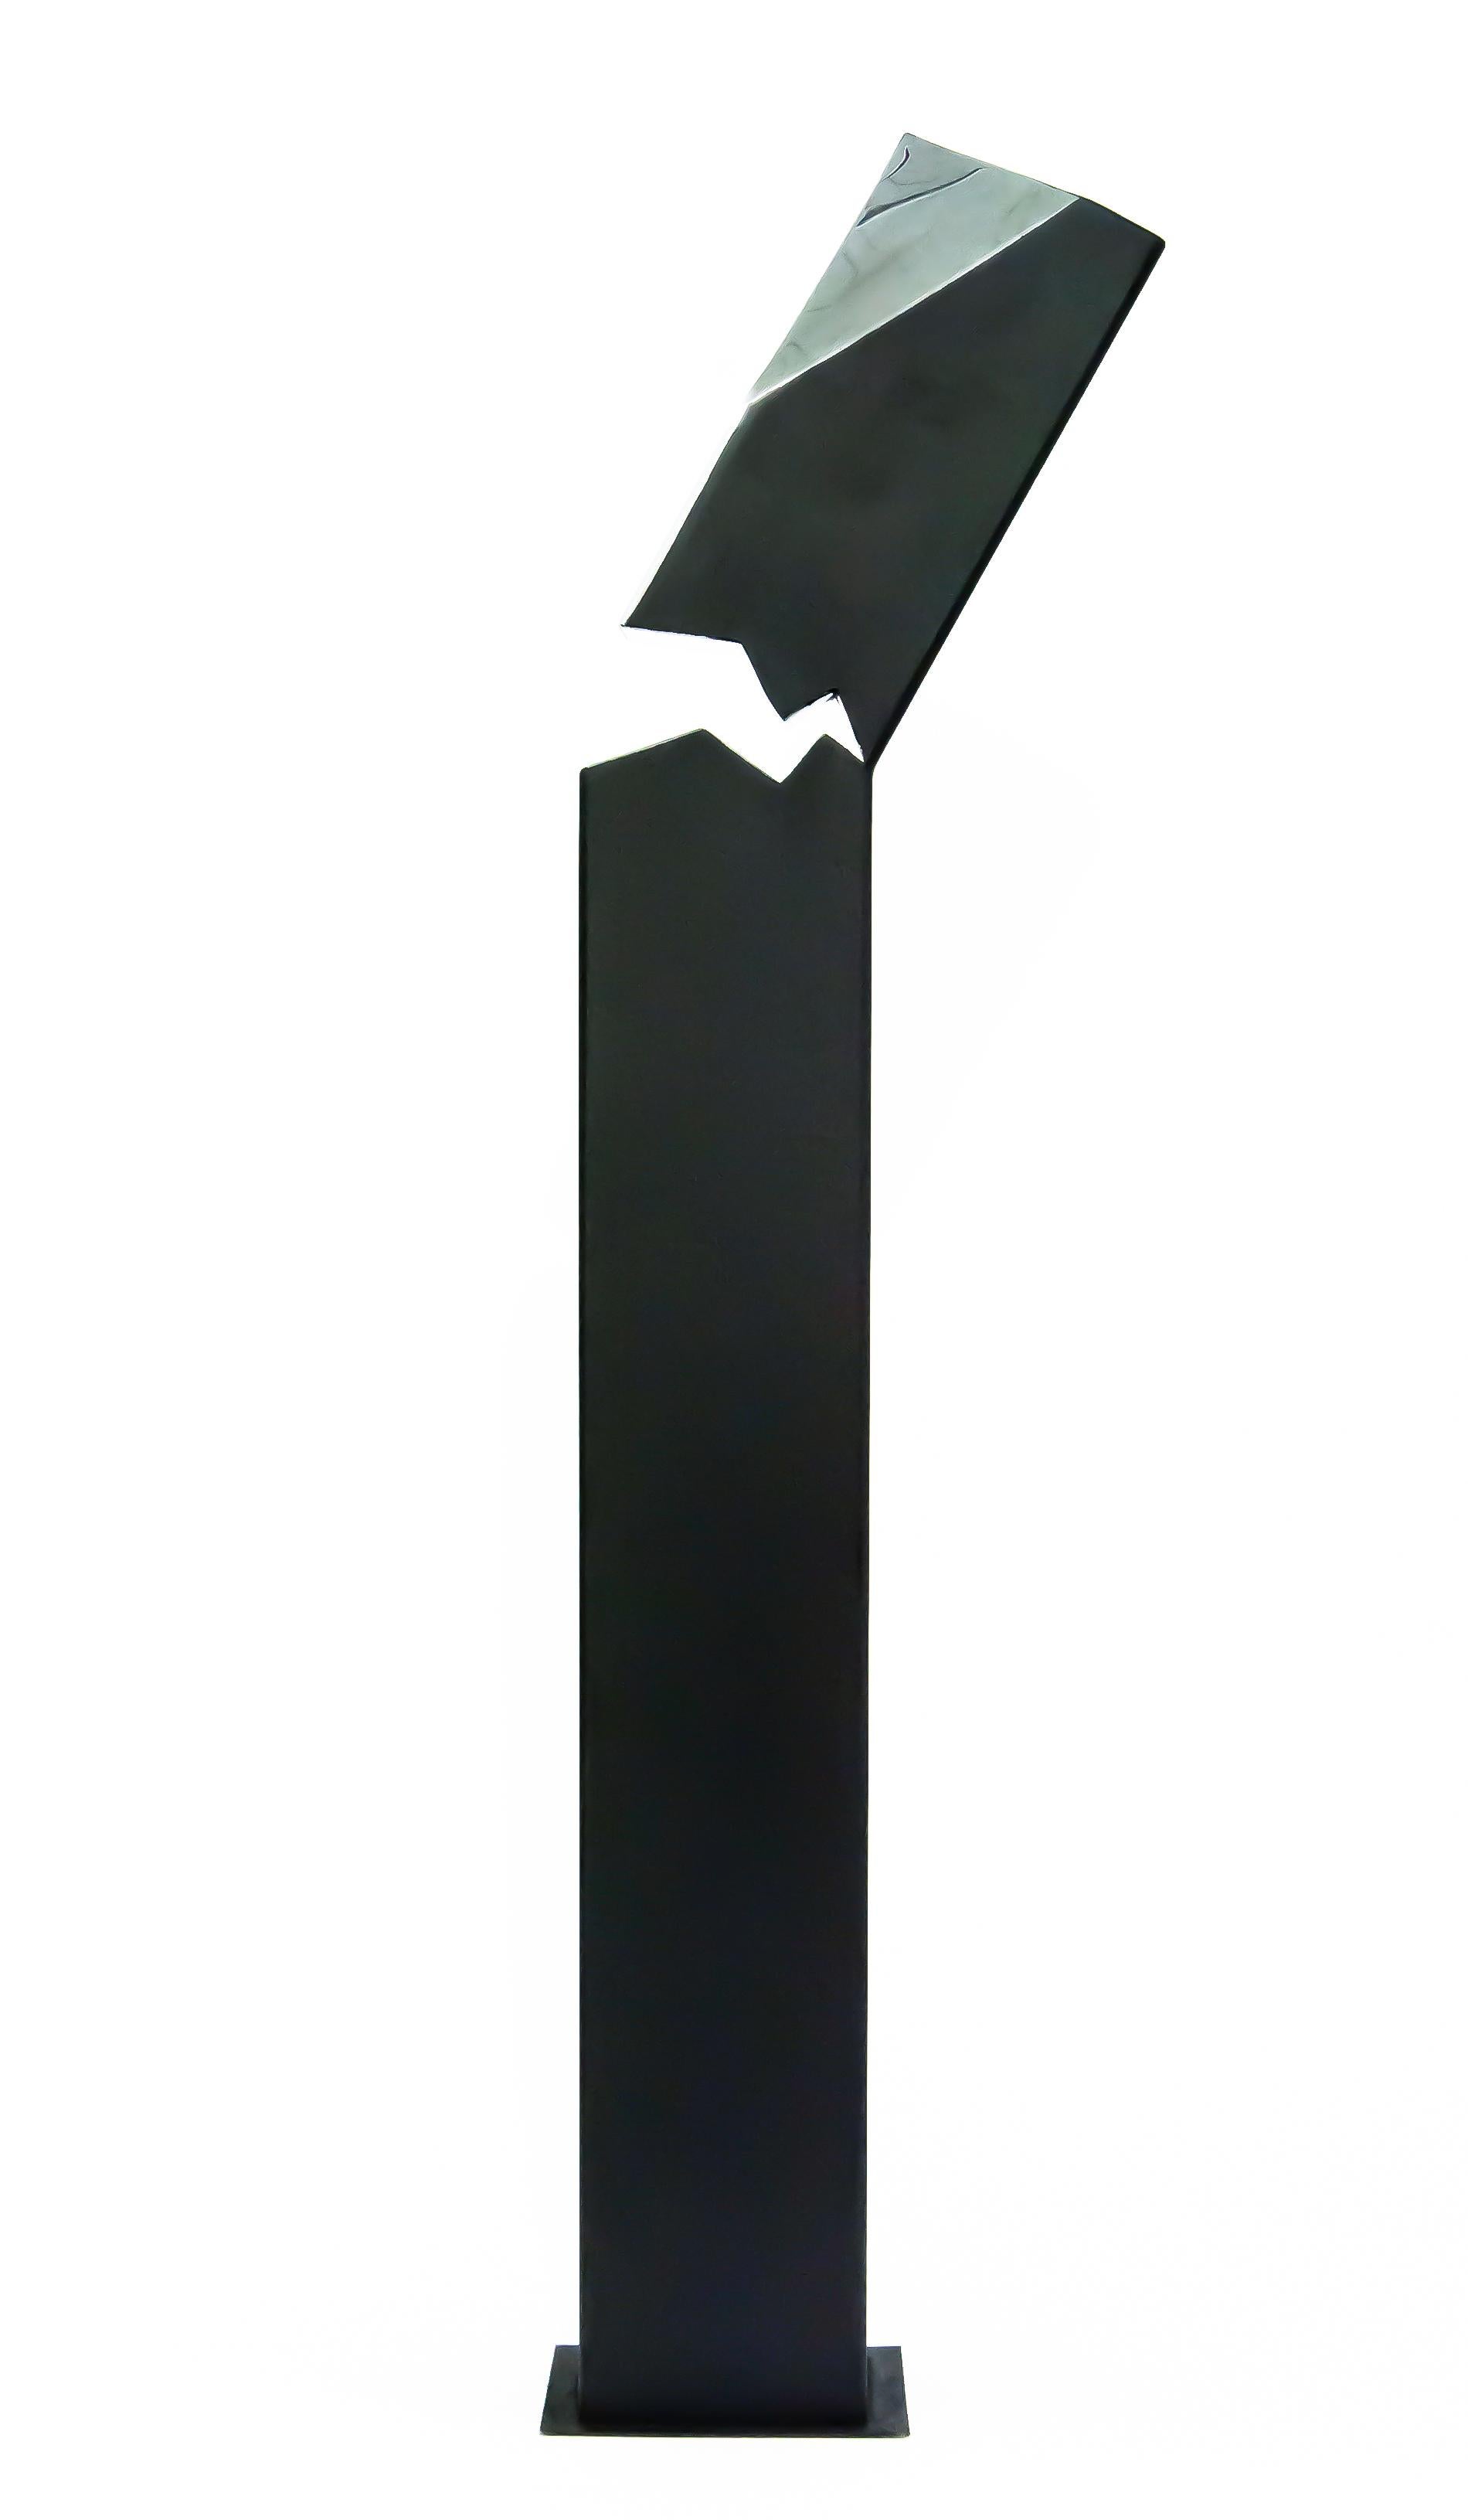 Athabasca Black 2/10- tall, modern, geometric, contemporary, steel sculpture For Sale 5